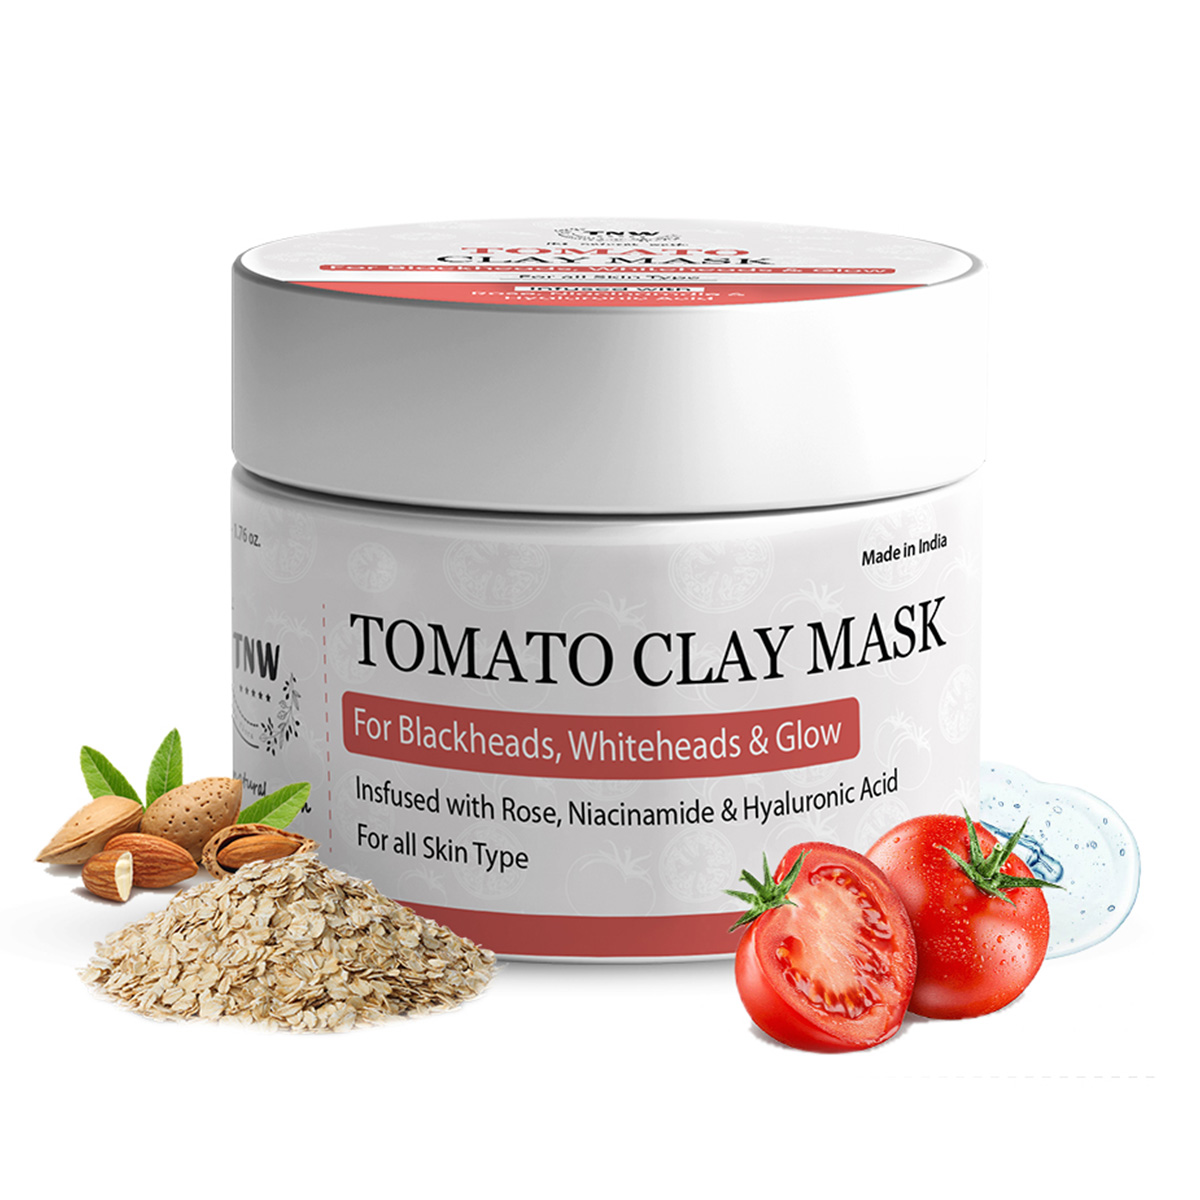 TNW - The Natural Wash Tomato Clay Mask For Glowing & Healthy Skin, 50gm